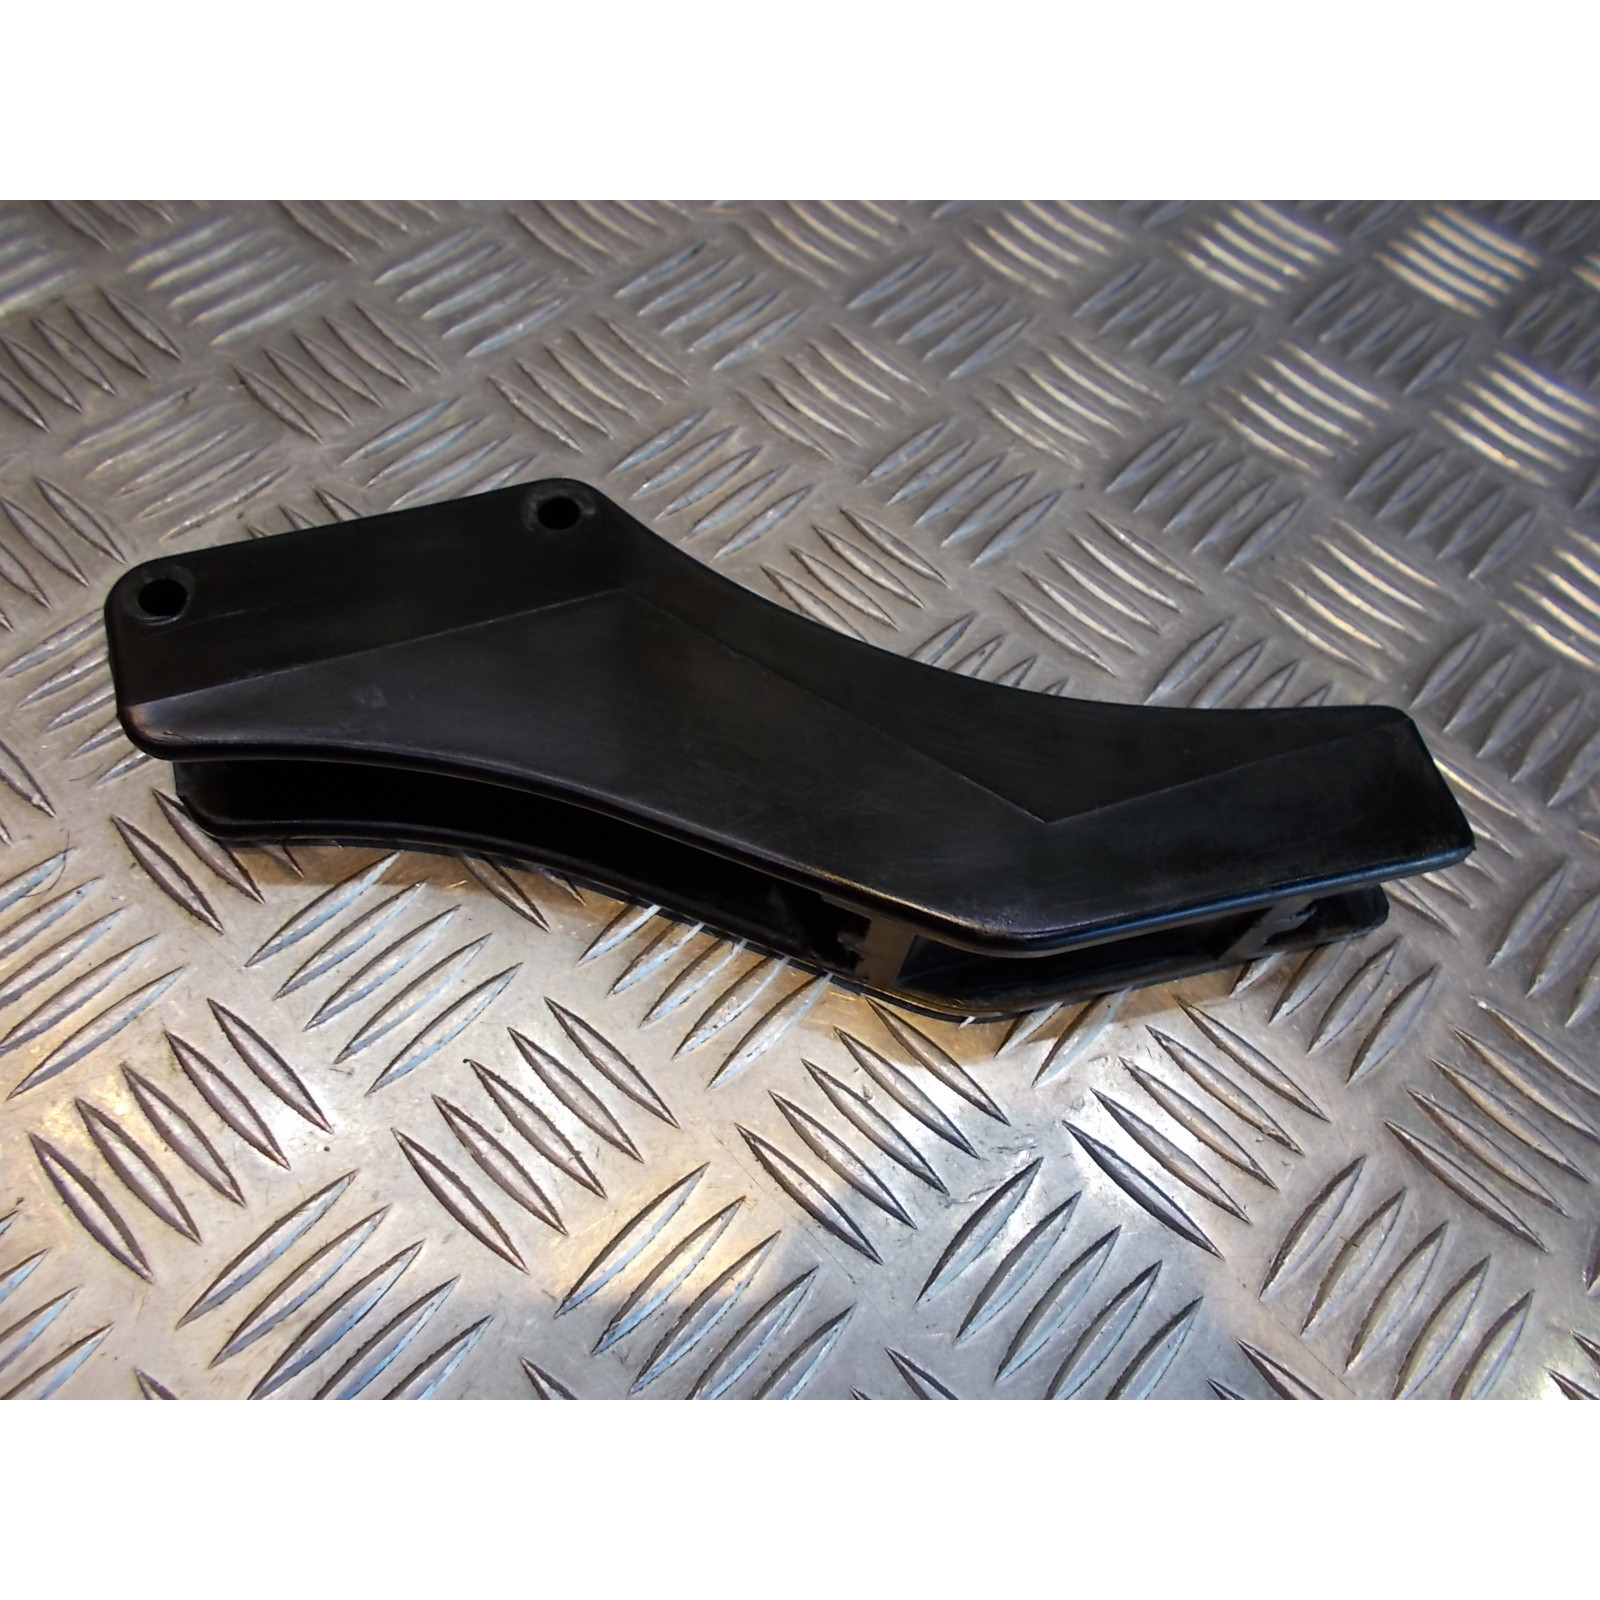 patin protege guide chaine moto yamaha 50 dt 5bk mecaboite am6